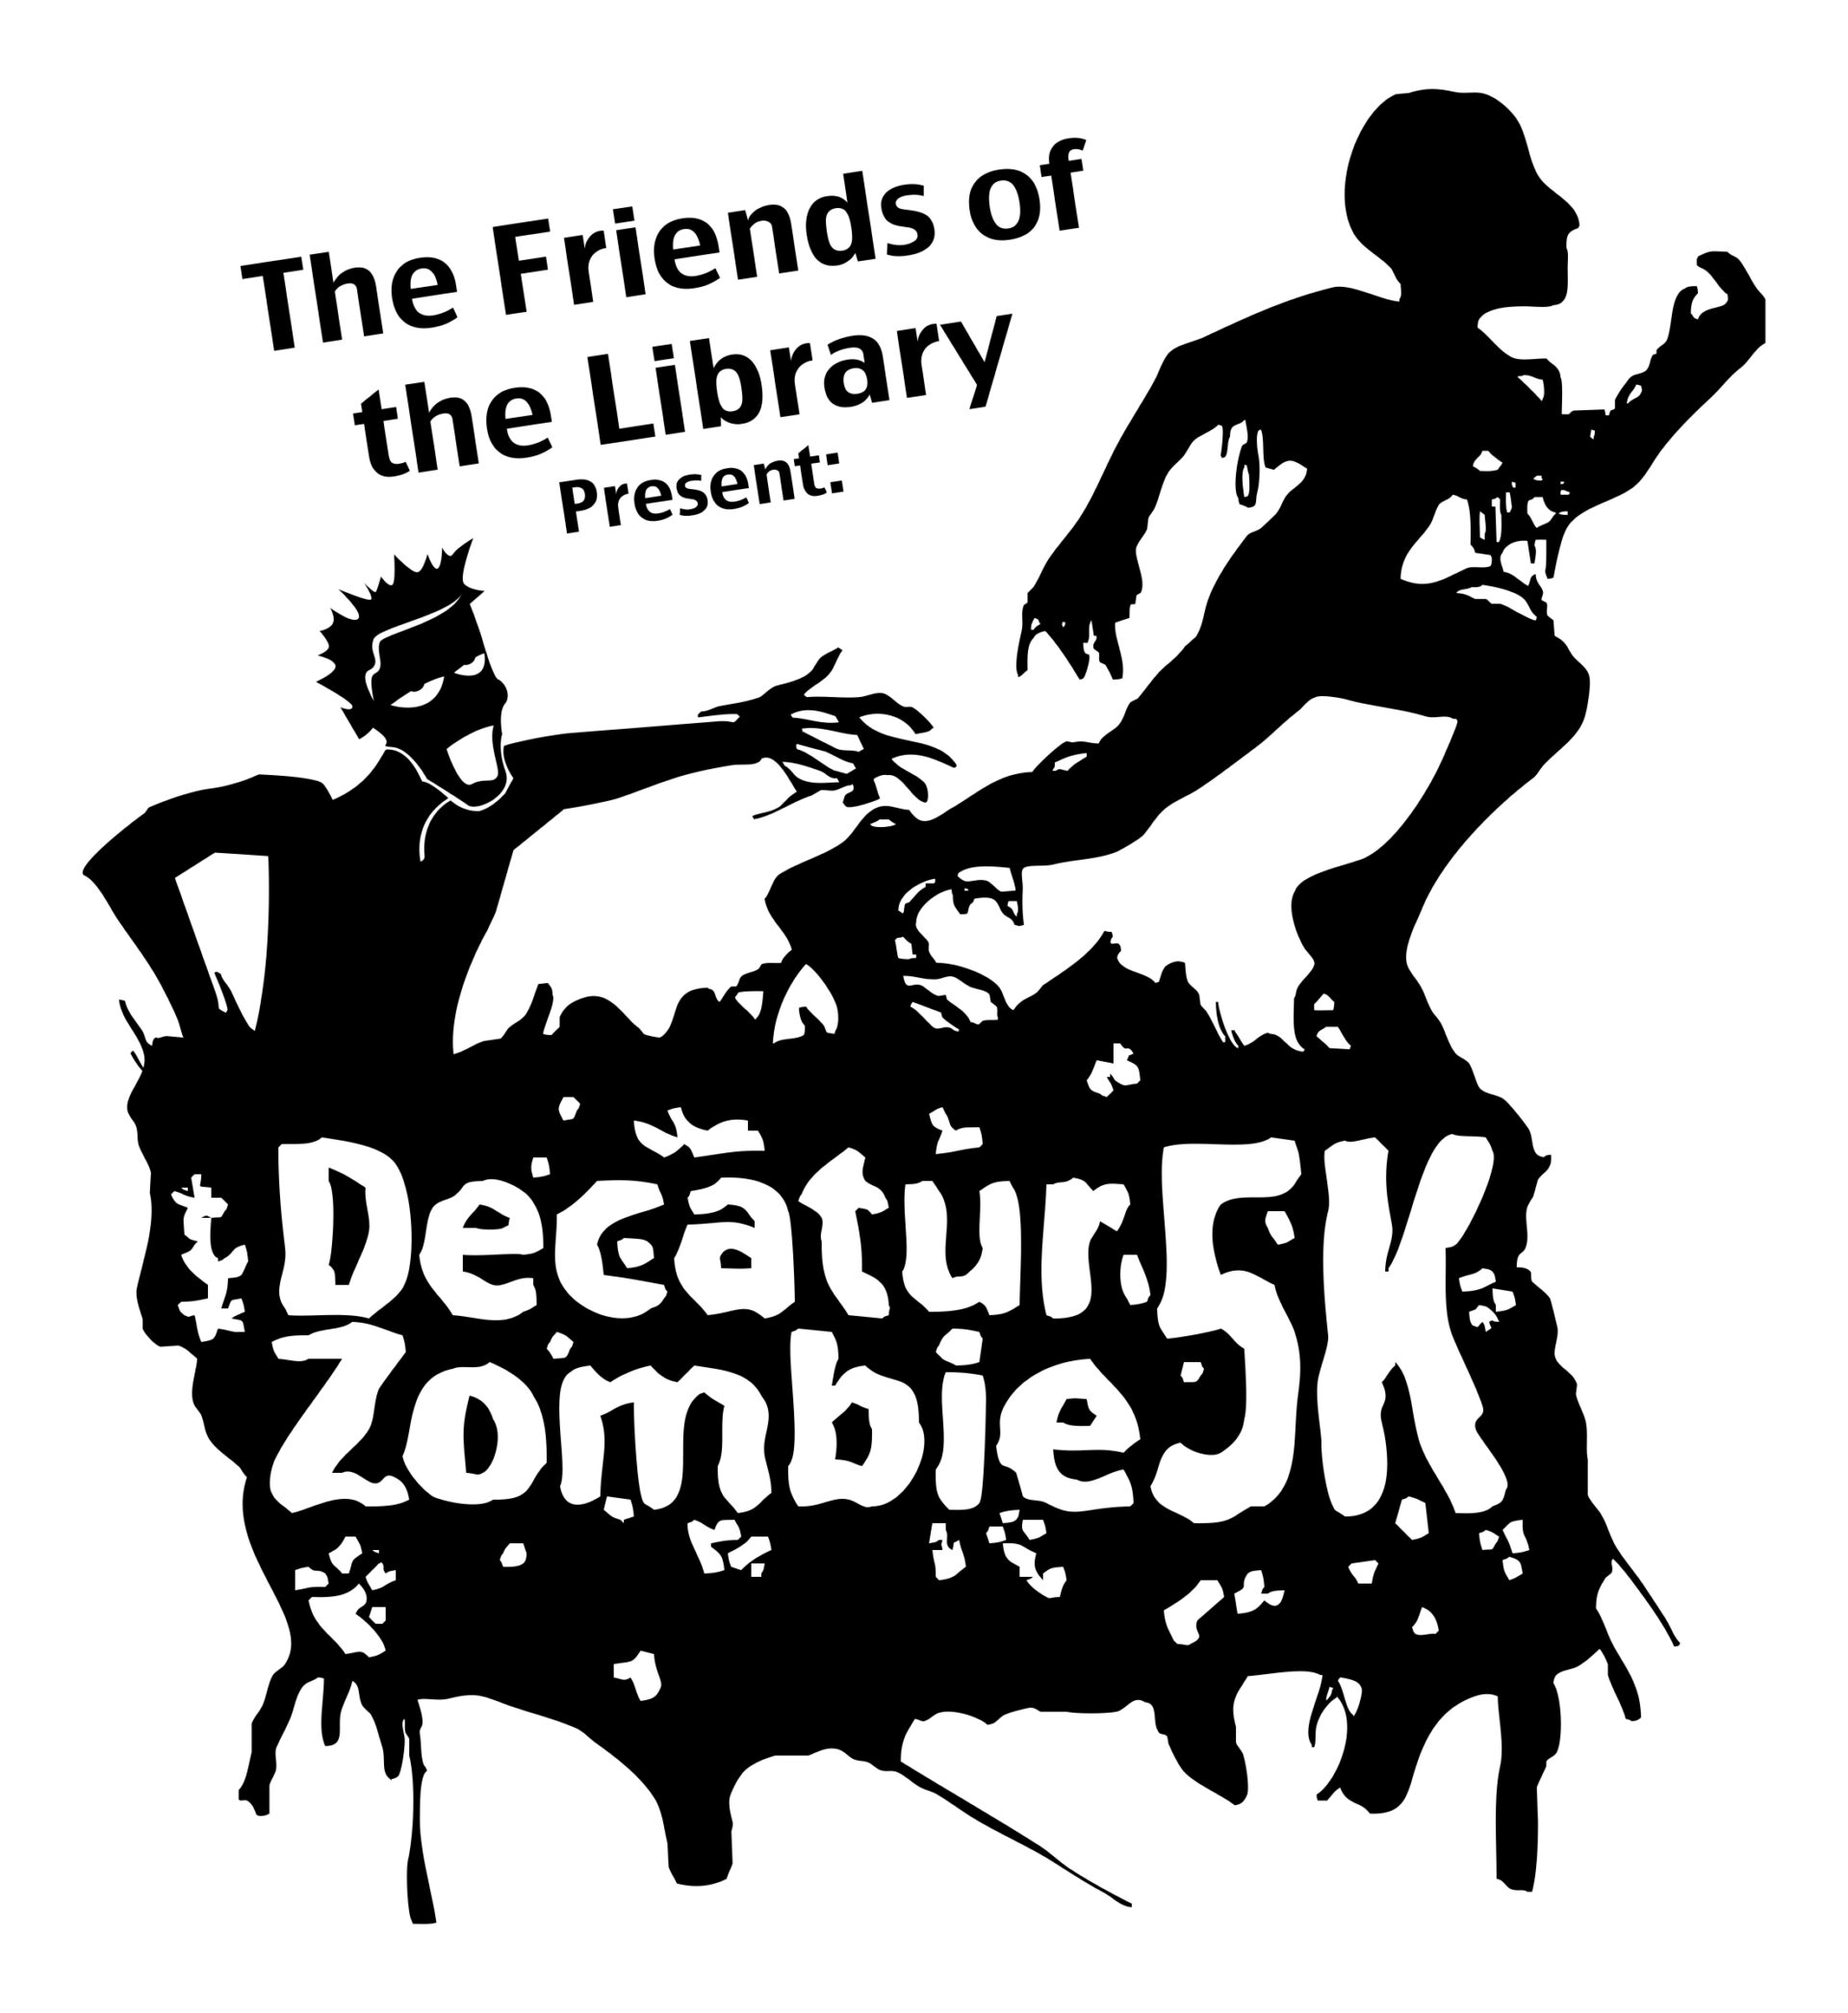 The Decatur Zombie 5K is back!